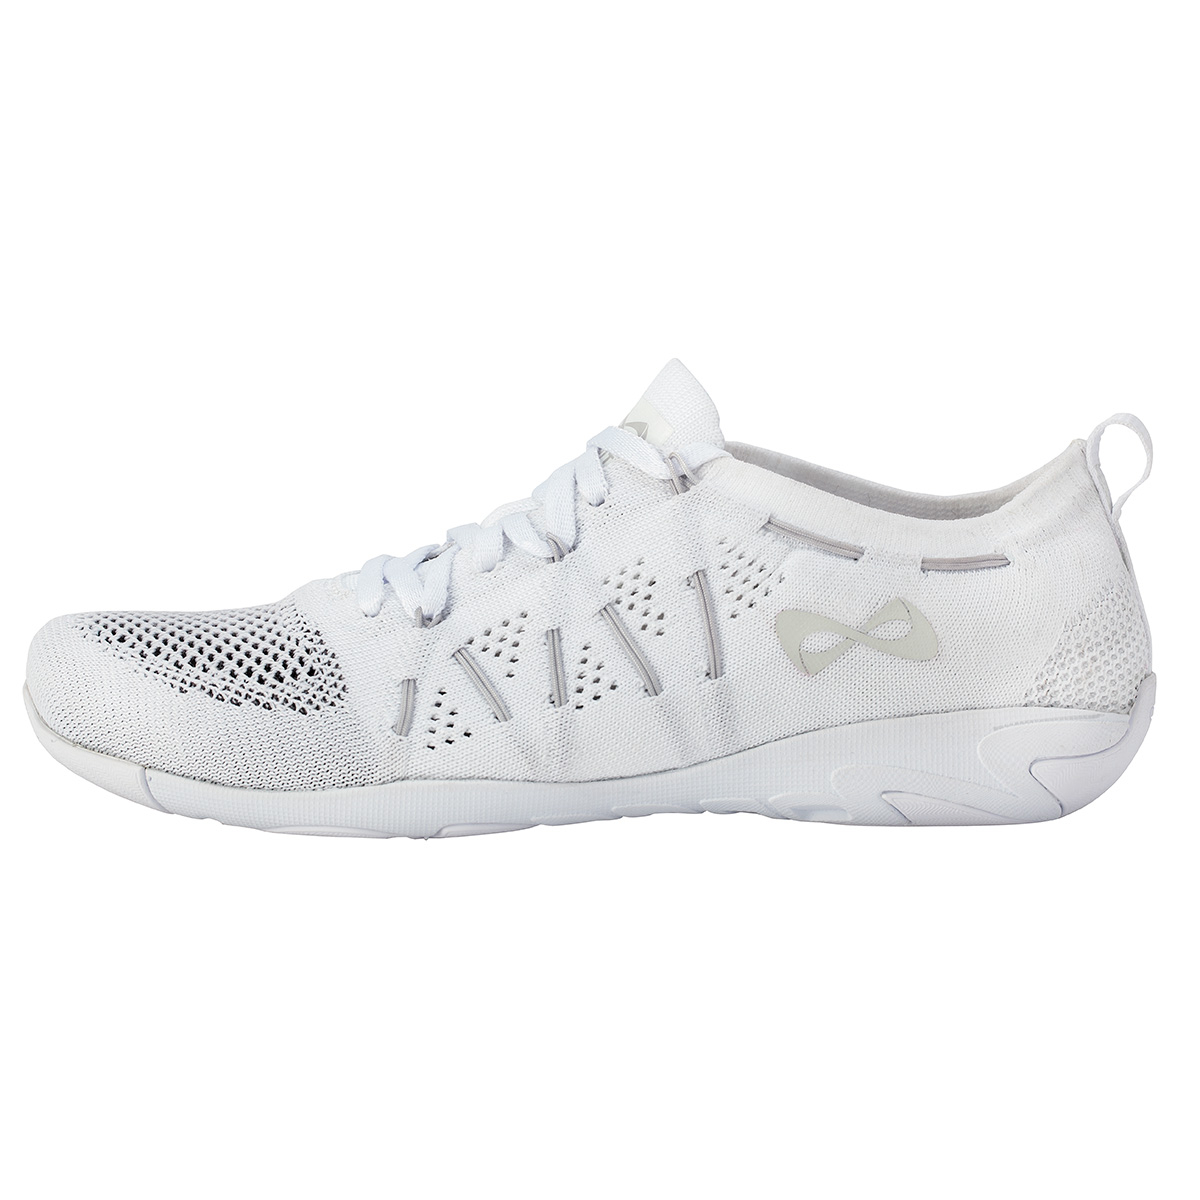 Shop Chasse Cheer Shoes Amazon | UP TO 51% OFF